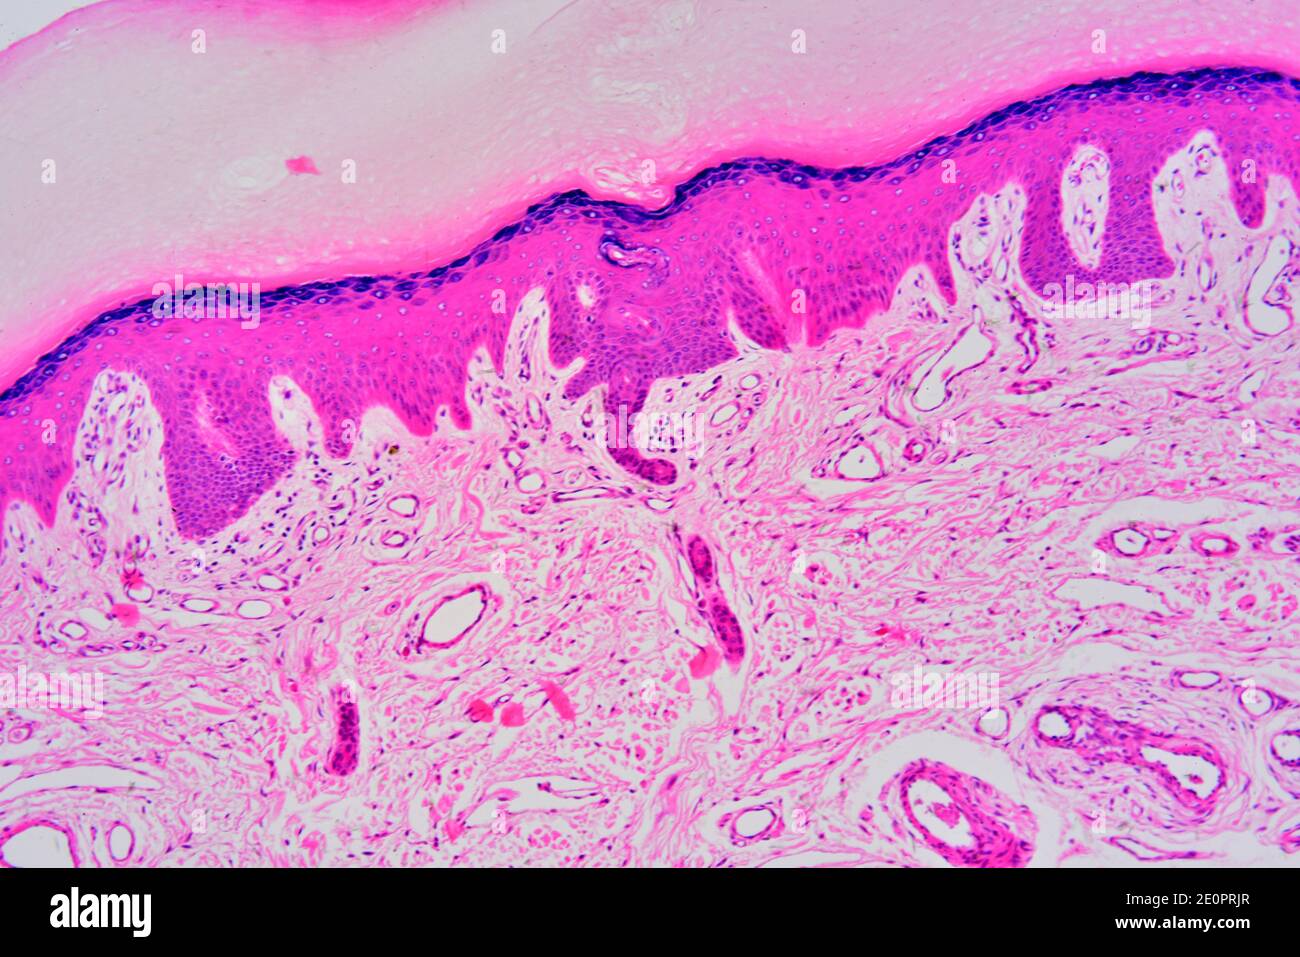 Human skin with epidermis and dermis with sweat gland. Photomicrograph X75 at 10 cm wide. Stock Photo